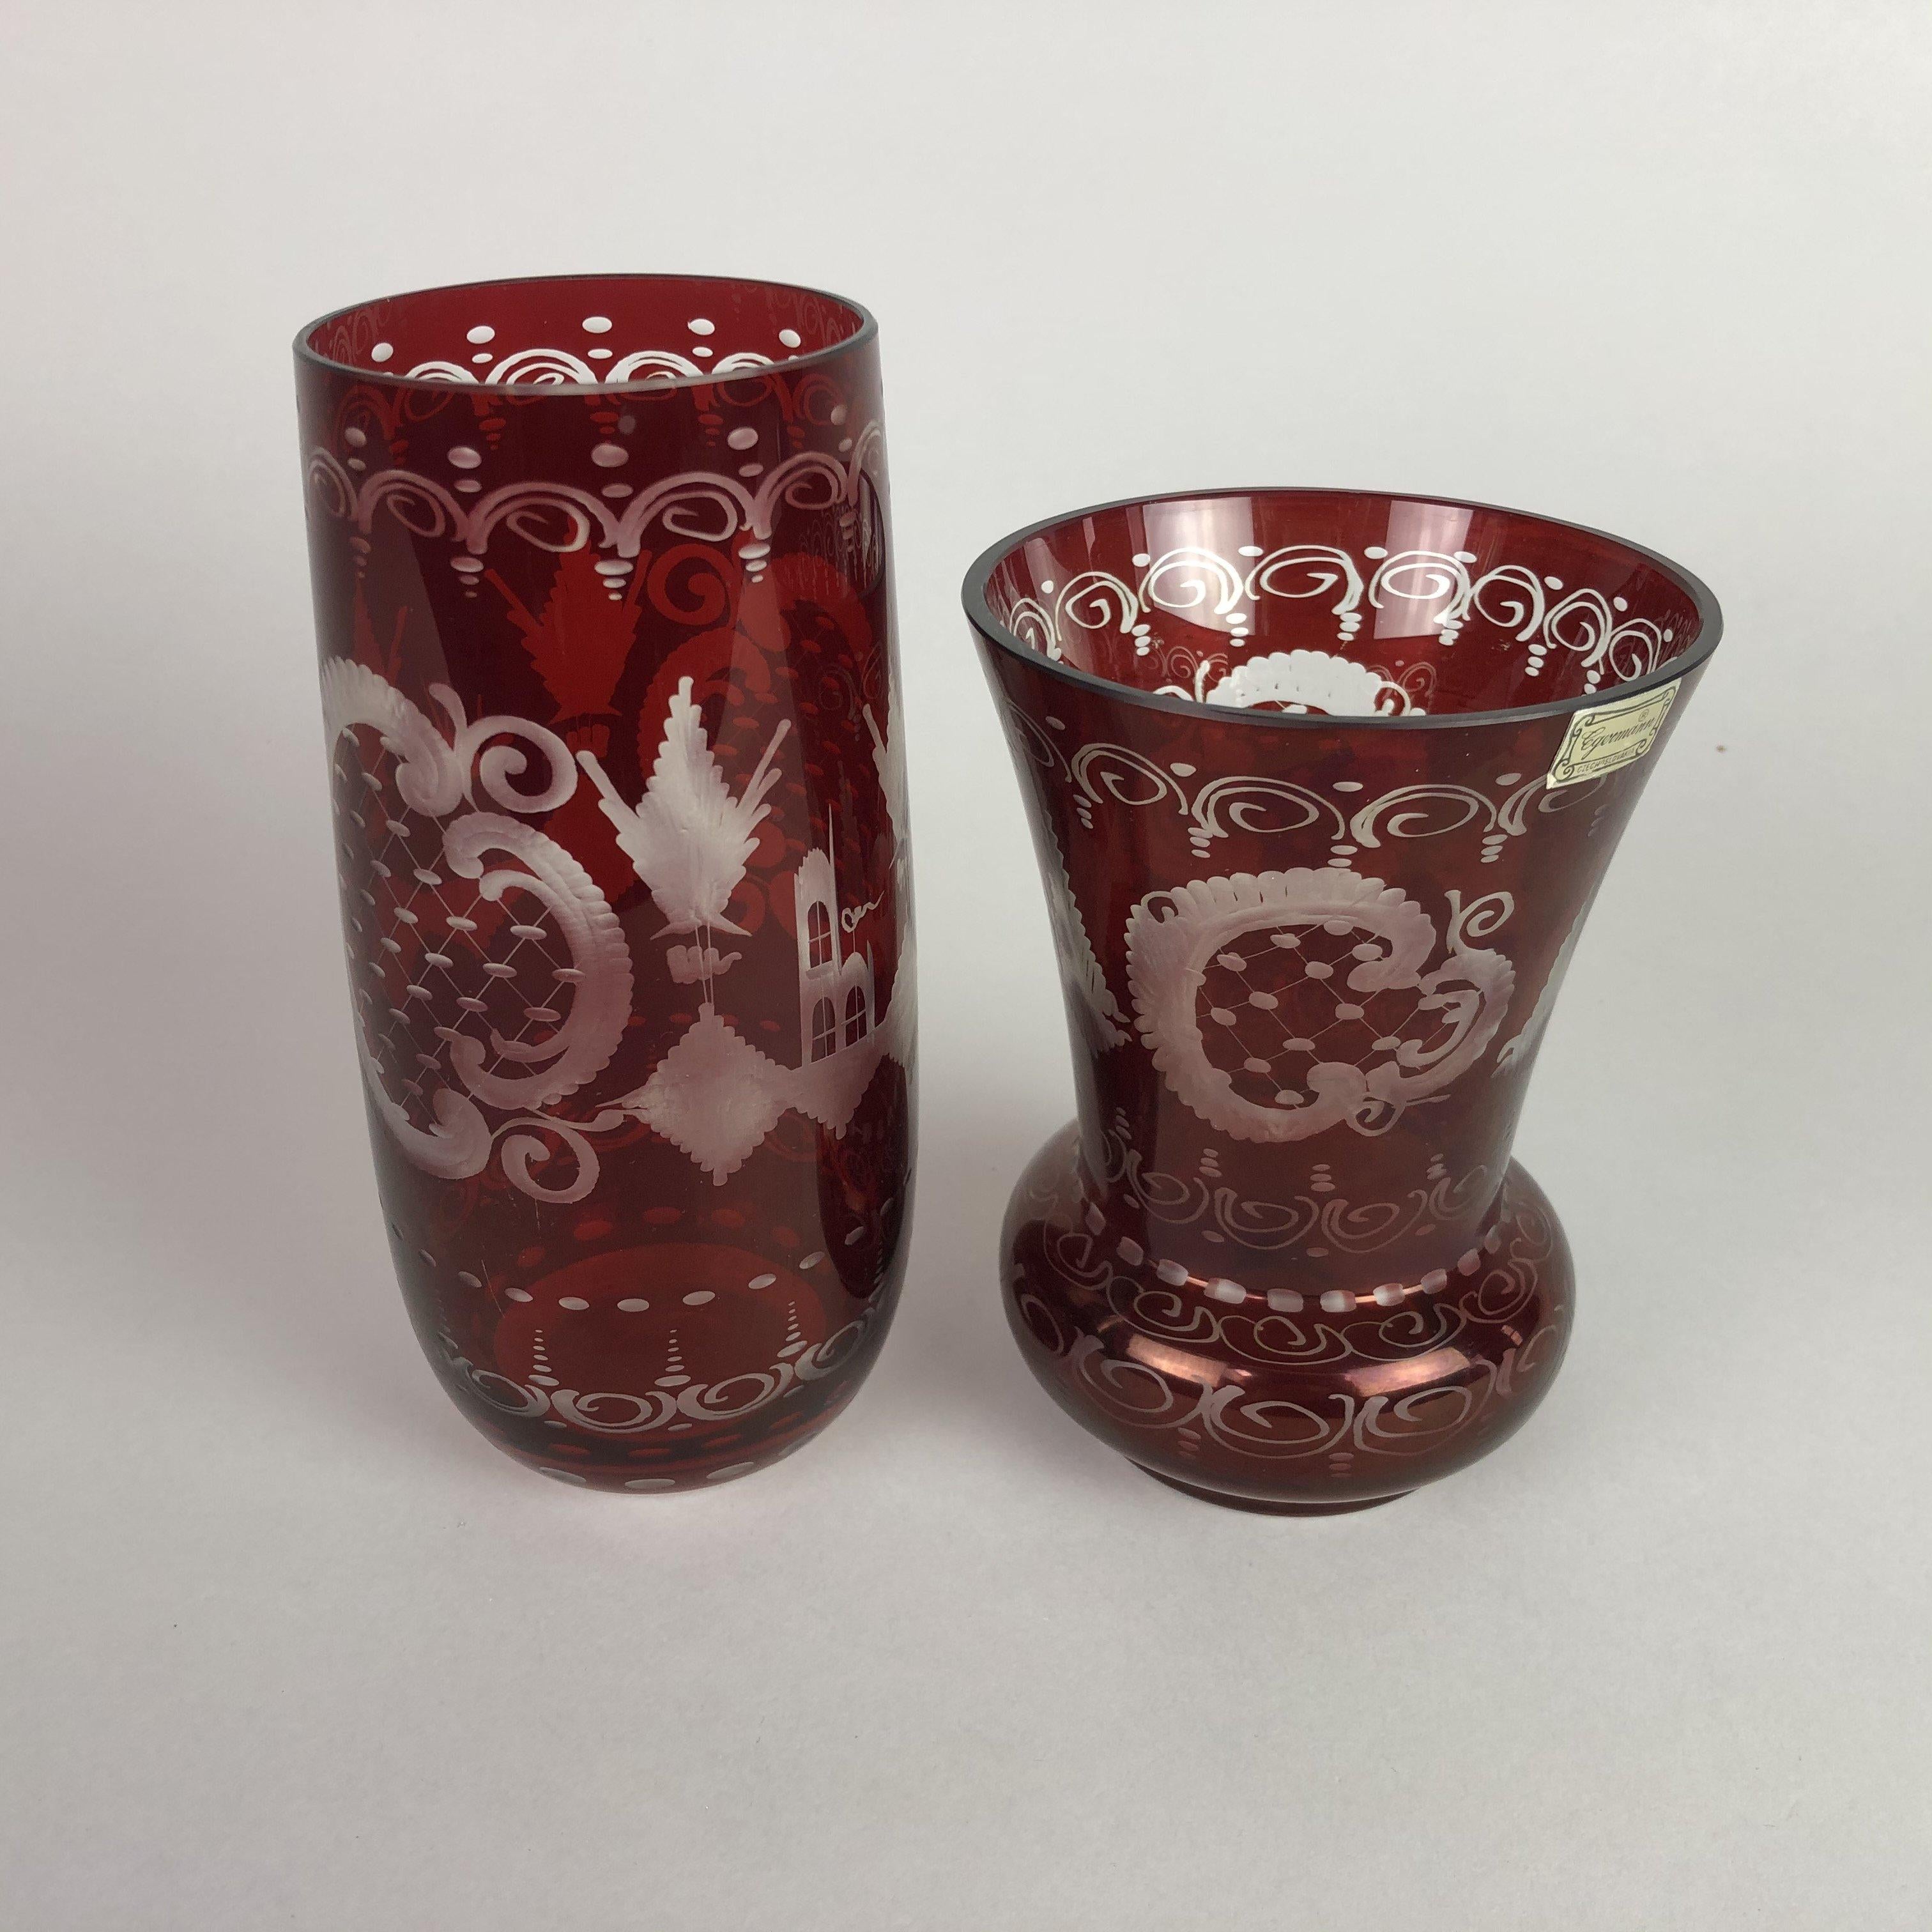 Set of two vintage handmade and handcut to clear etched glass vases. Beautiful ruby red coloured Czech vases from the 1940s. 
One vase is 18 cm (7.1 inch) high and the other one is 14.5 (5.7 inch) cm high.